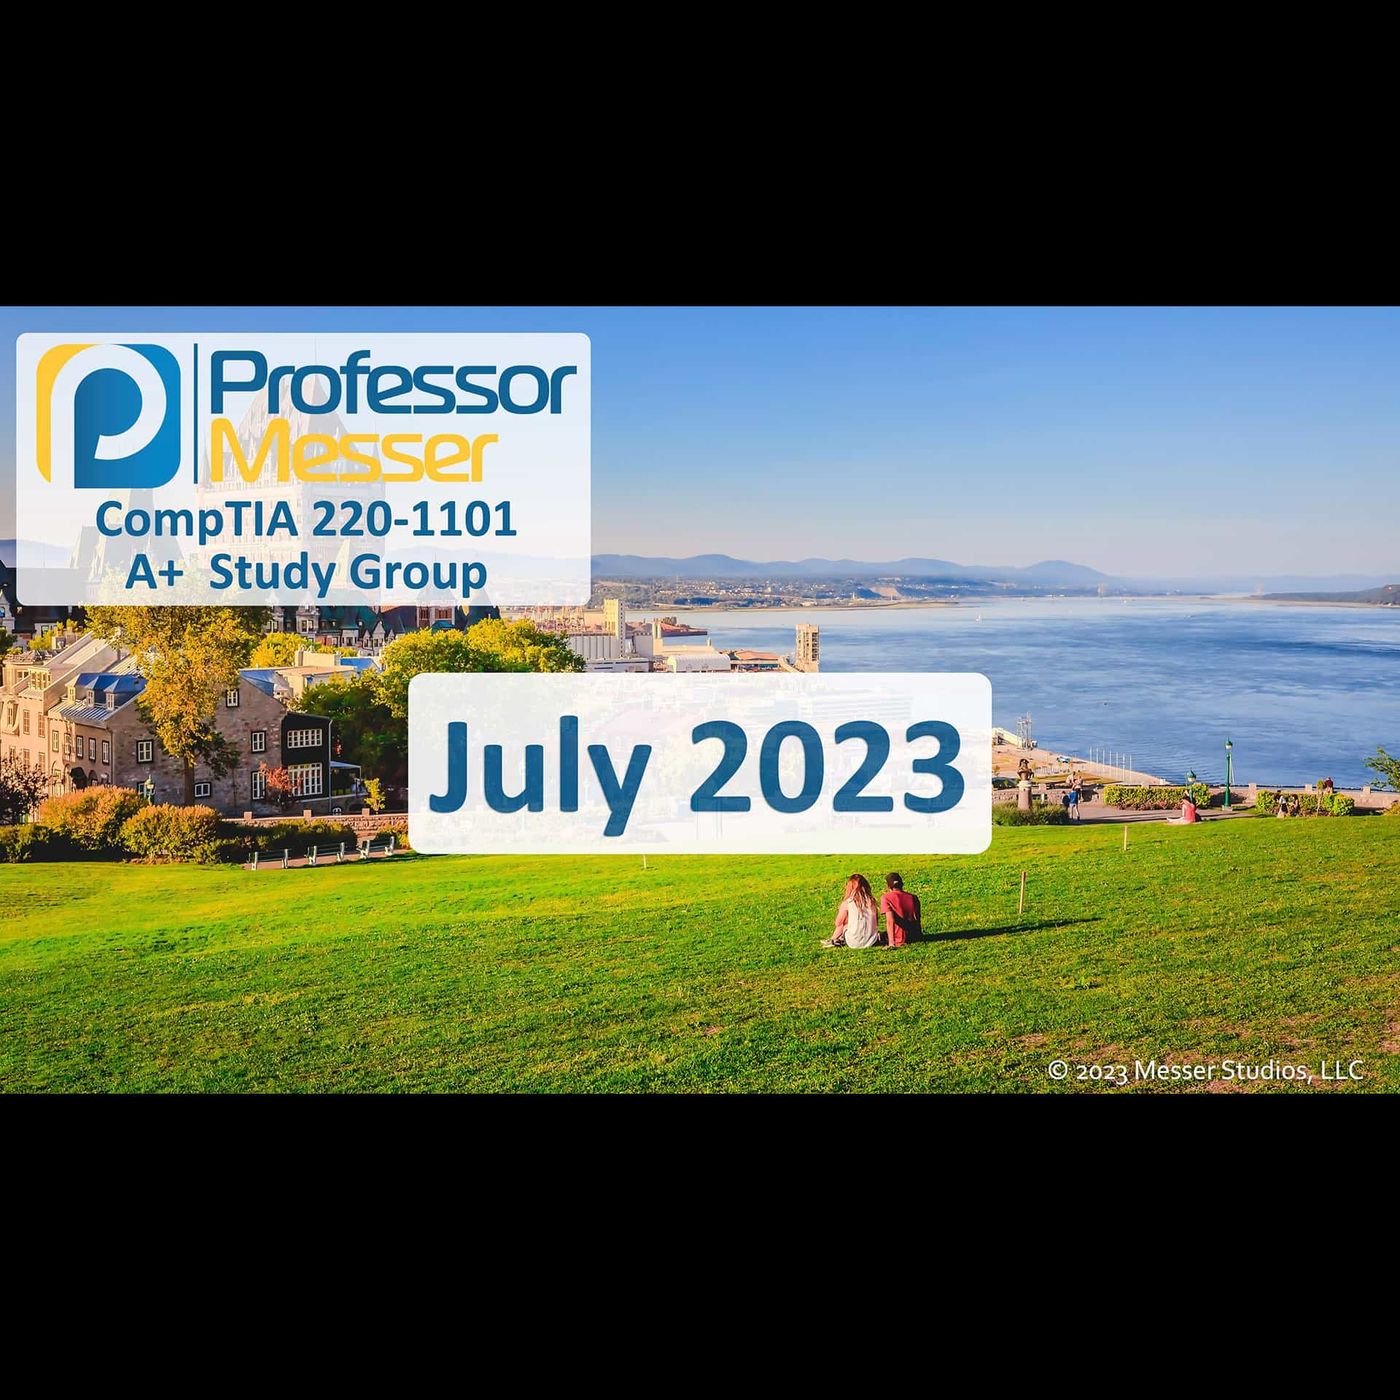 Professor Messer's CompTIA 220-1101 A+ Study Group - July 2023